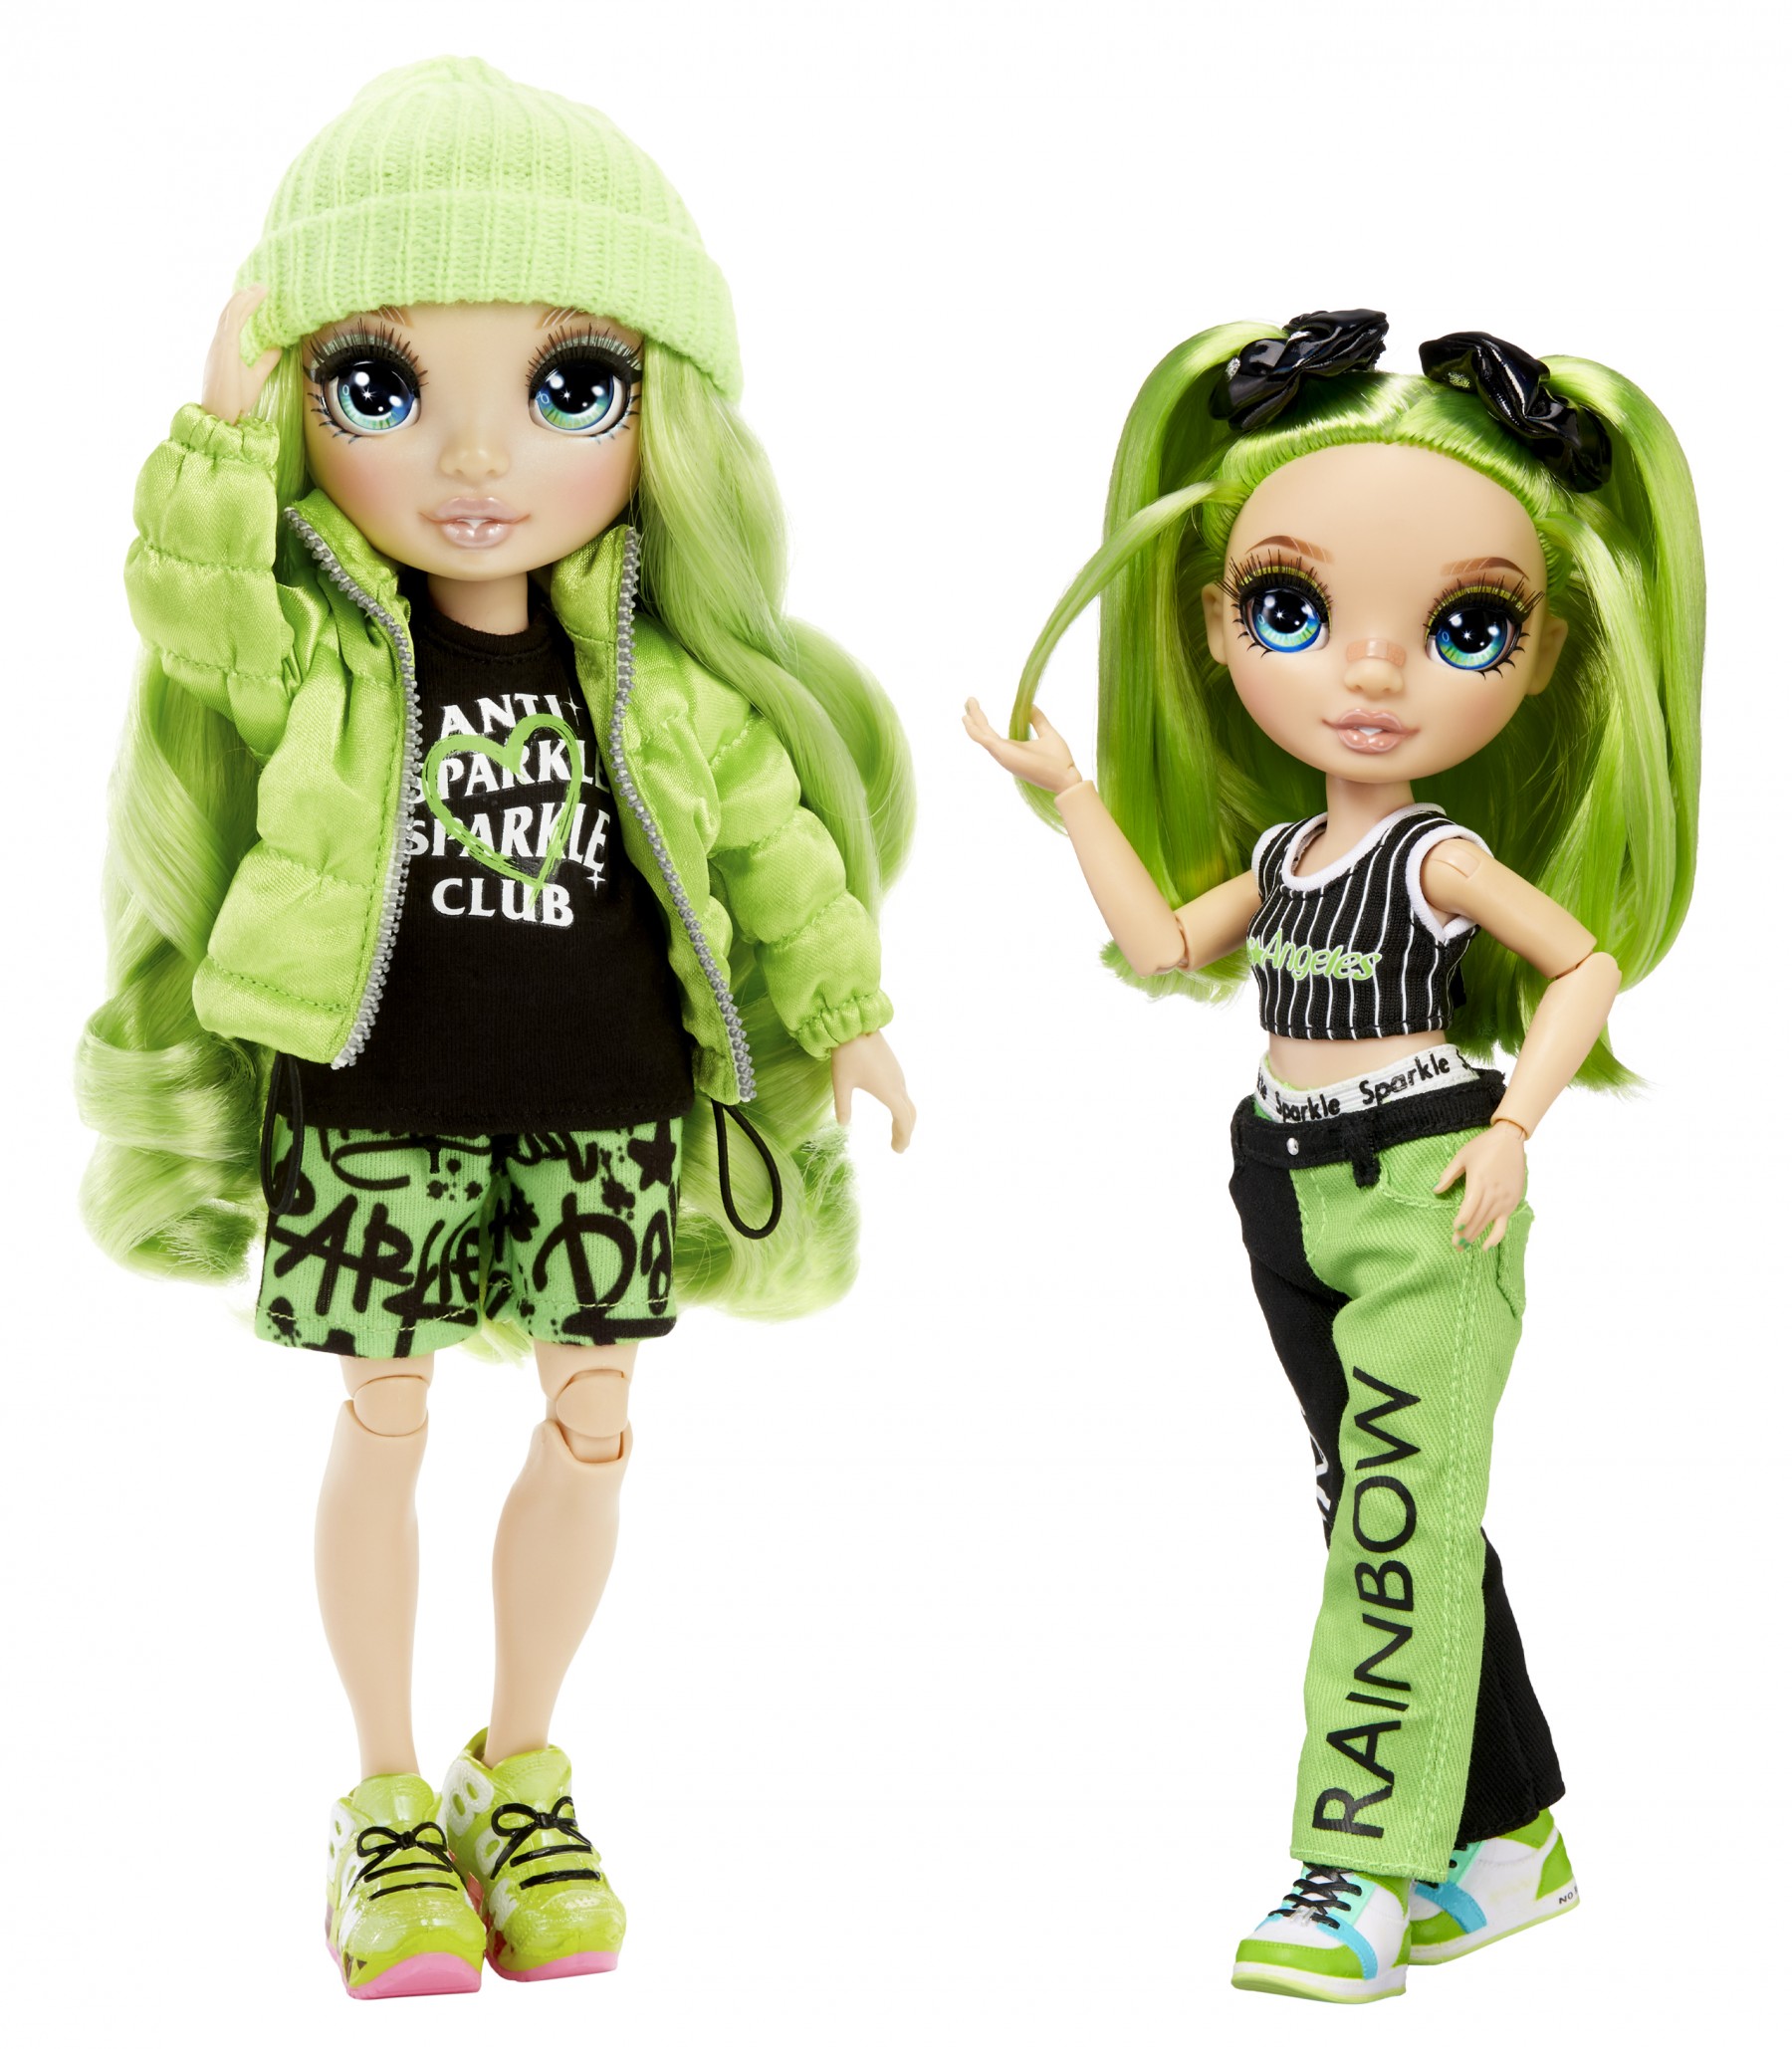 Rainbow High Junior High dolls 2022 - new collection with core 6